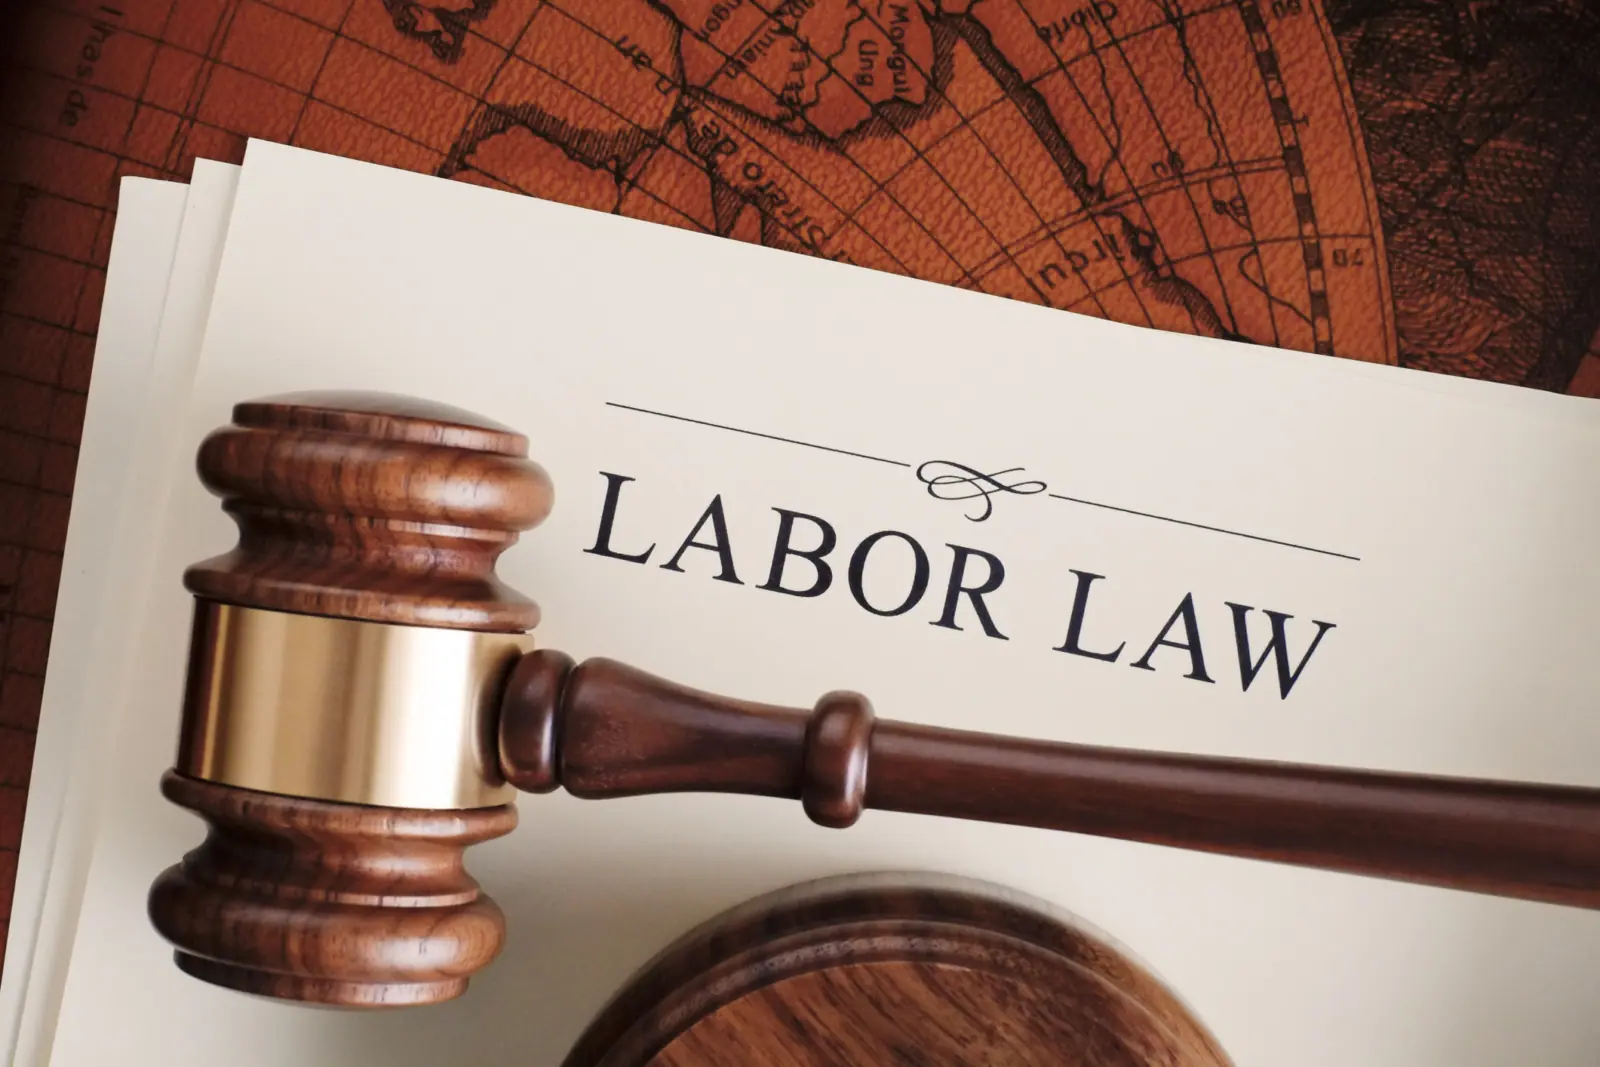 Guest Post: 3 Common Labor Law Compliance Mistakes and How to Avoid Them